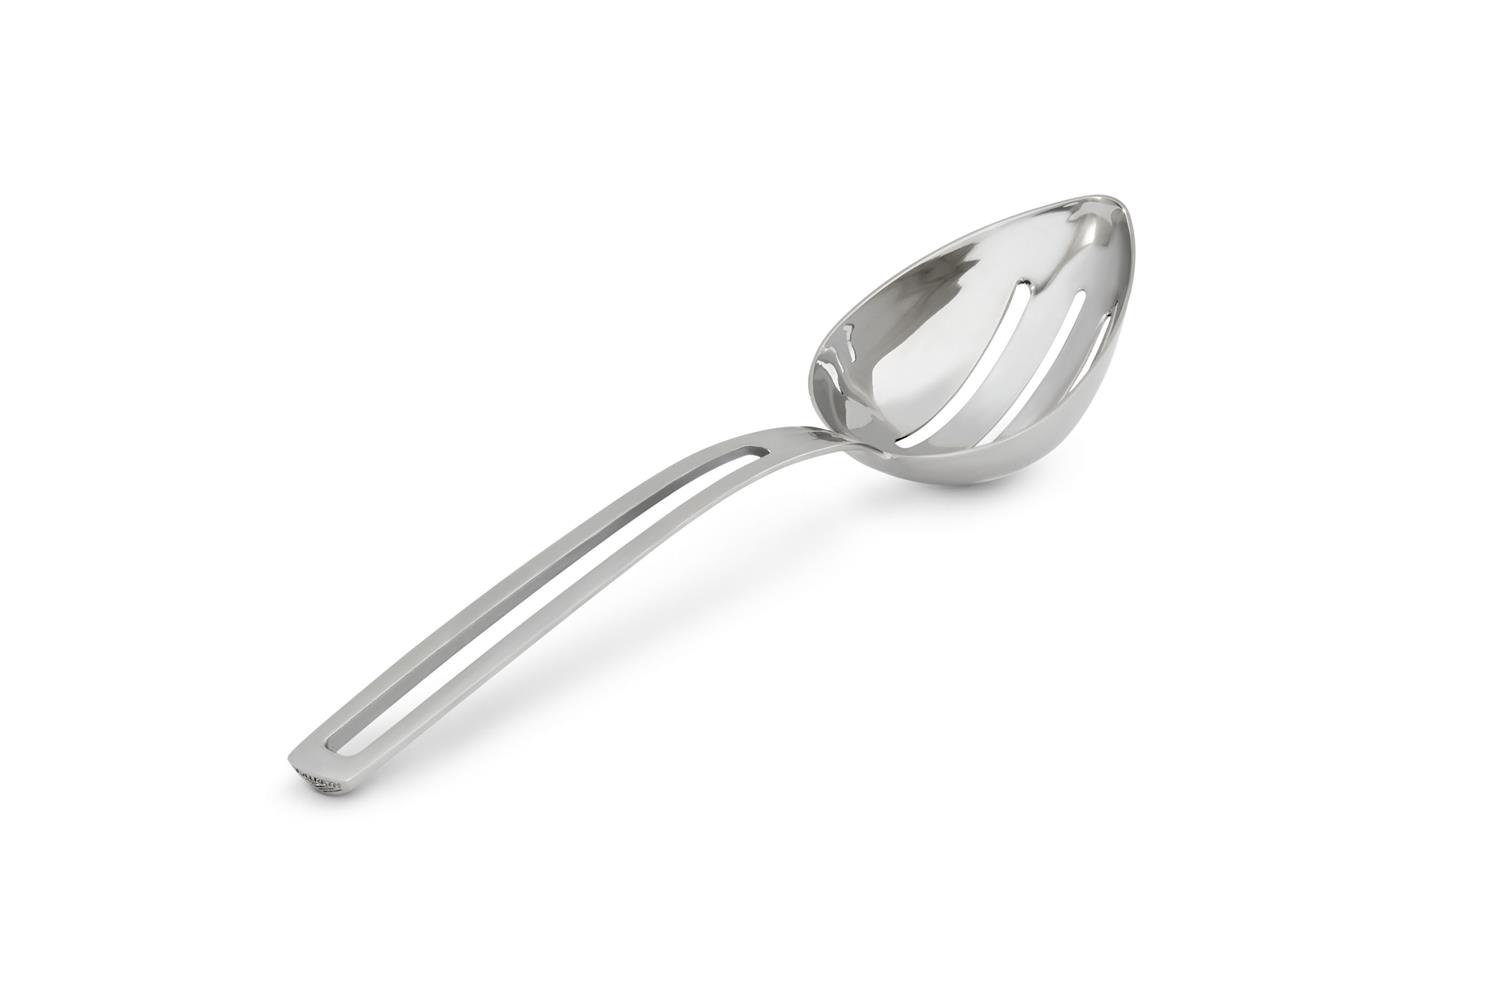 Vollrath 46729 Oval Serving Spoon, Slotted Bowl,